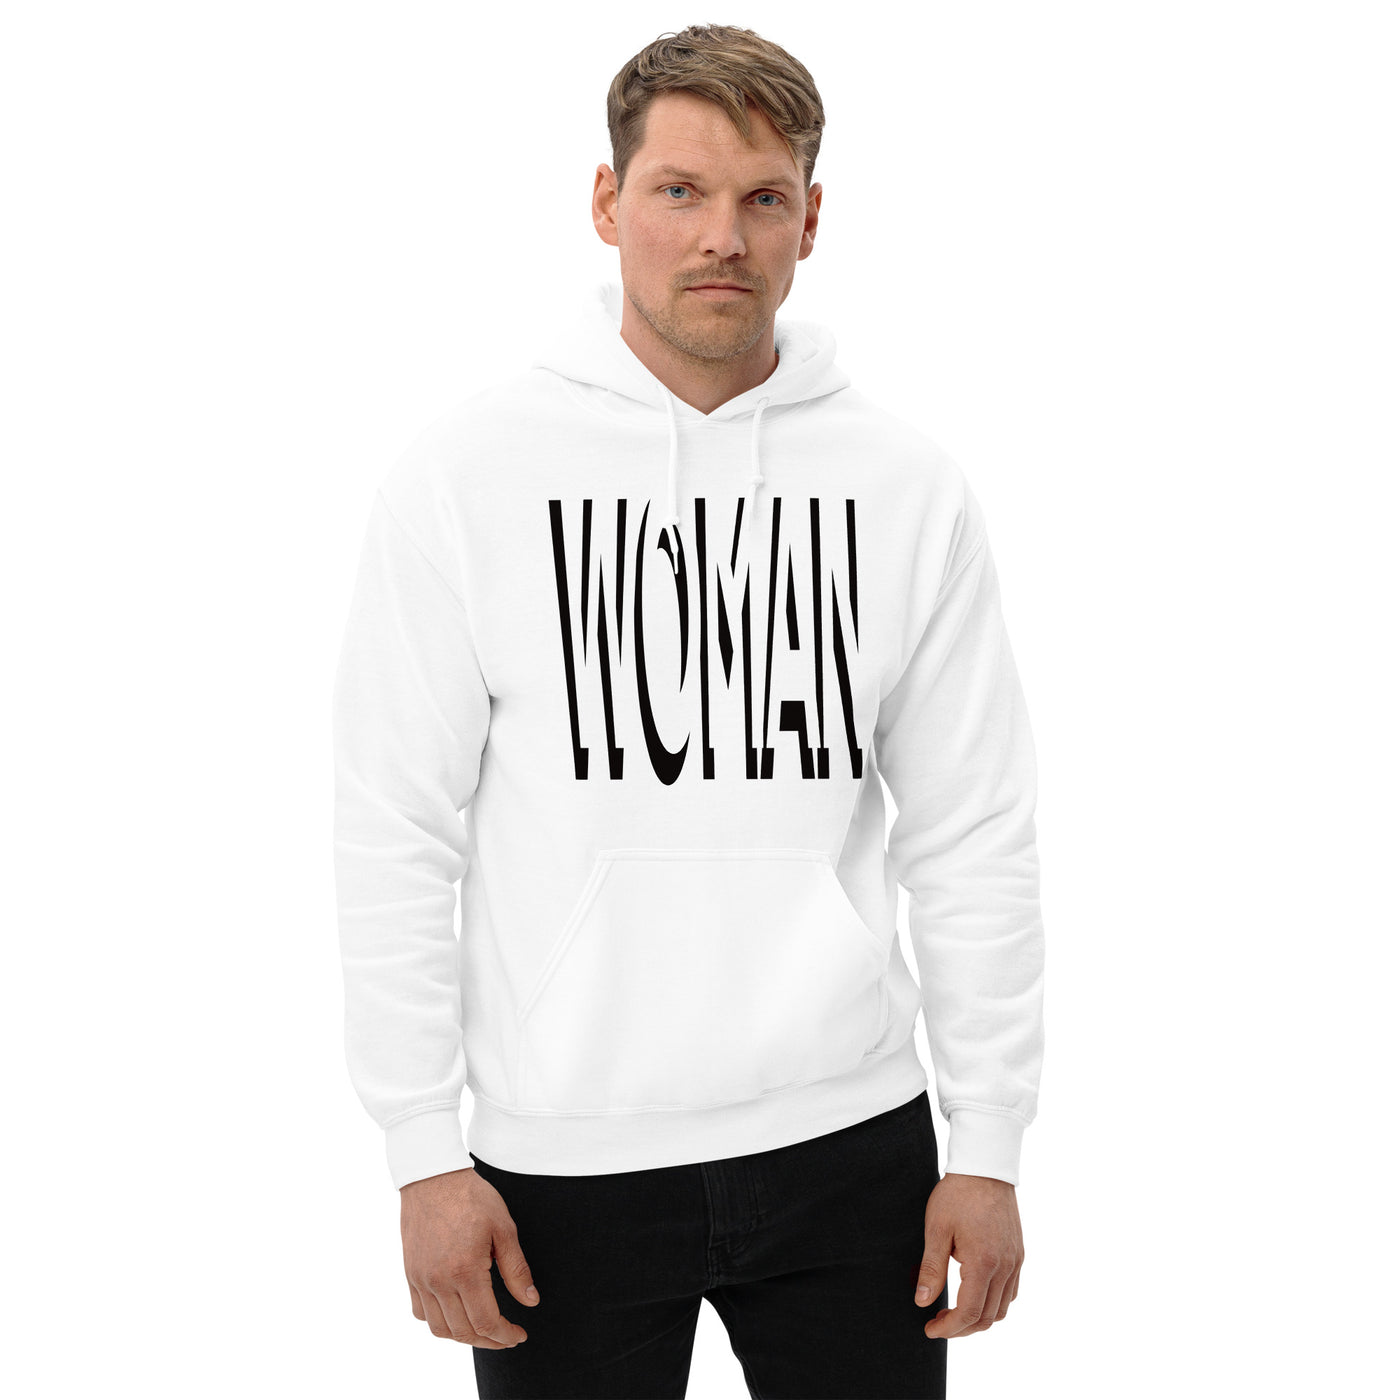 Unisex Hoodie with "WOMAN" imprint